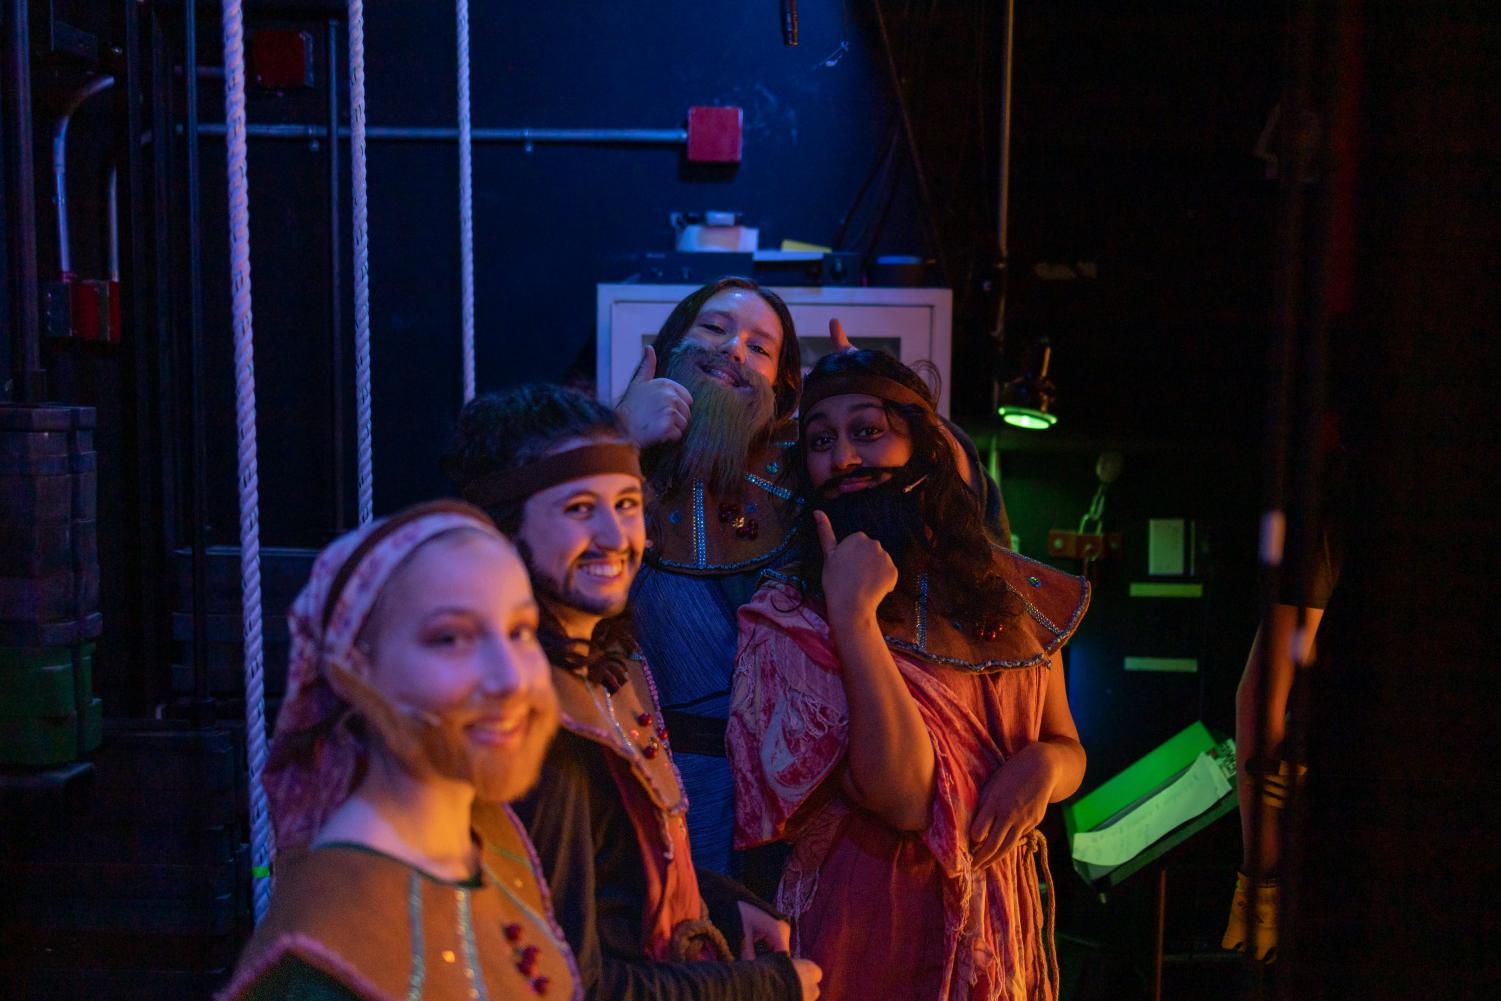 Backstage+at+Joseph+and+the+Amazing+Technicolor+Dreamcoat